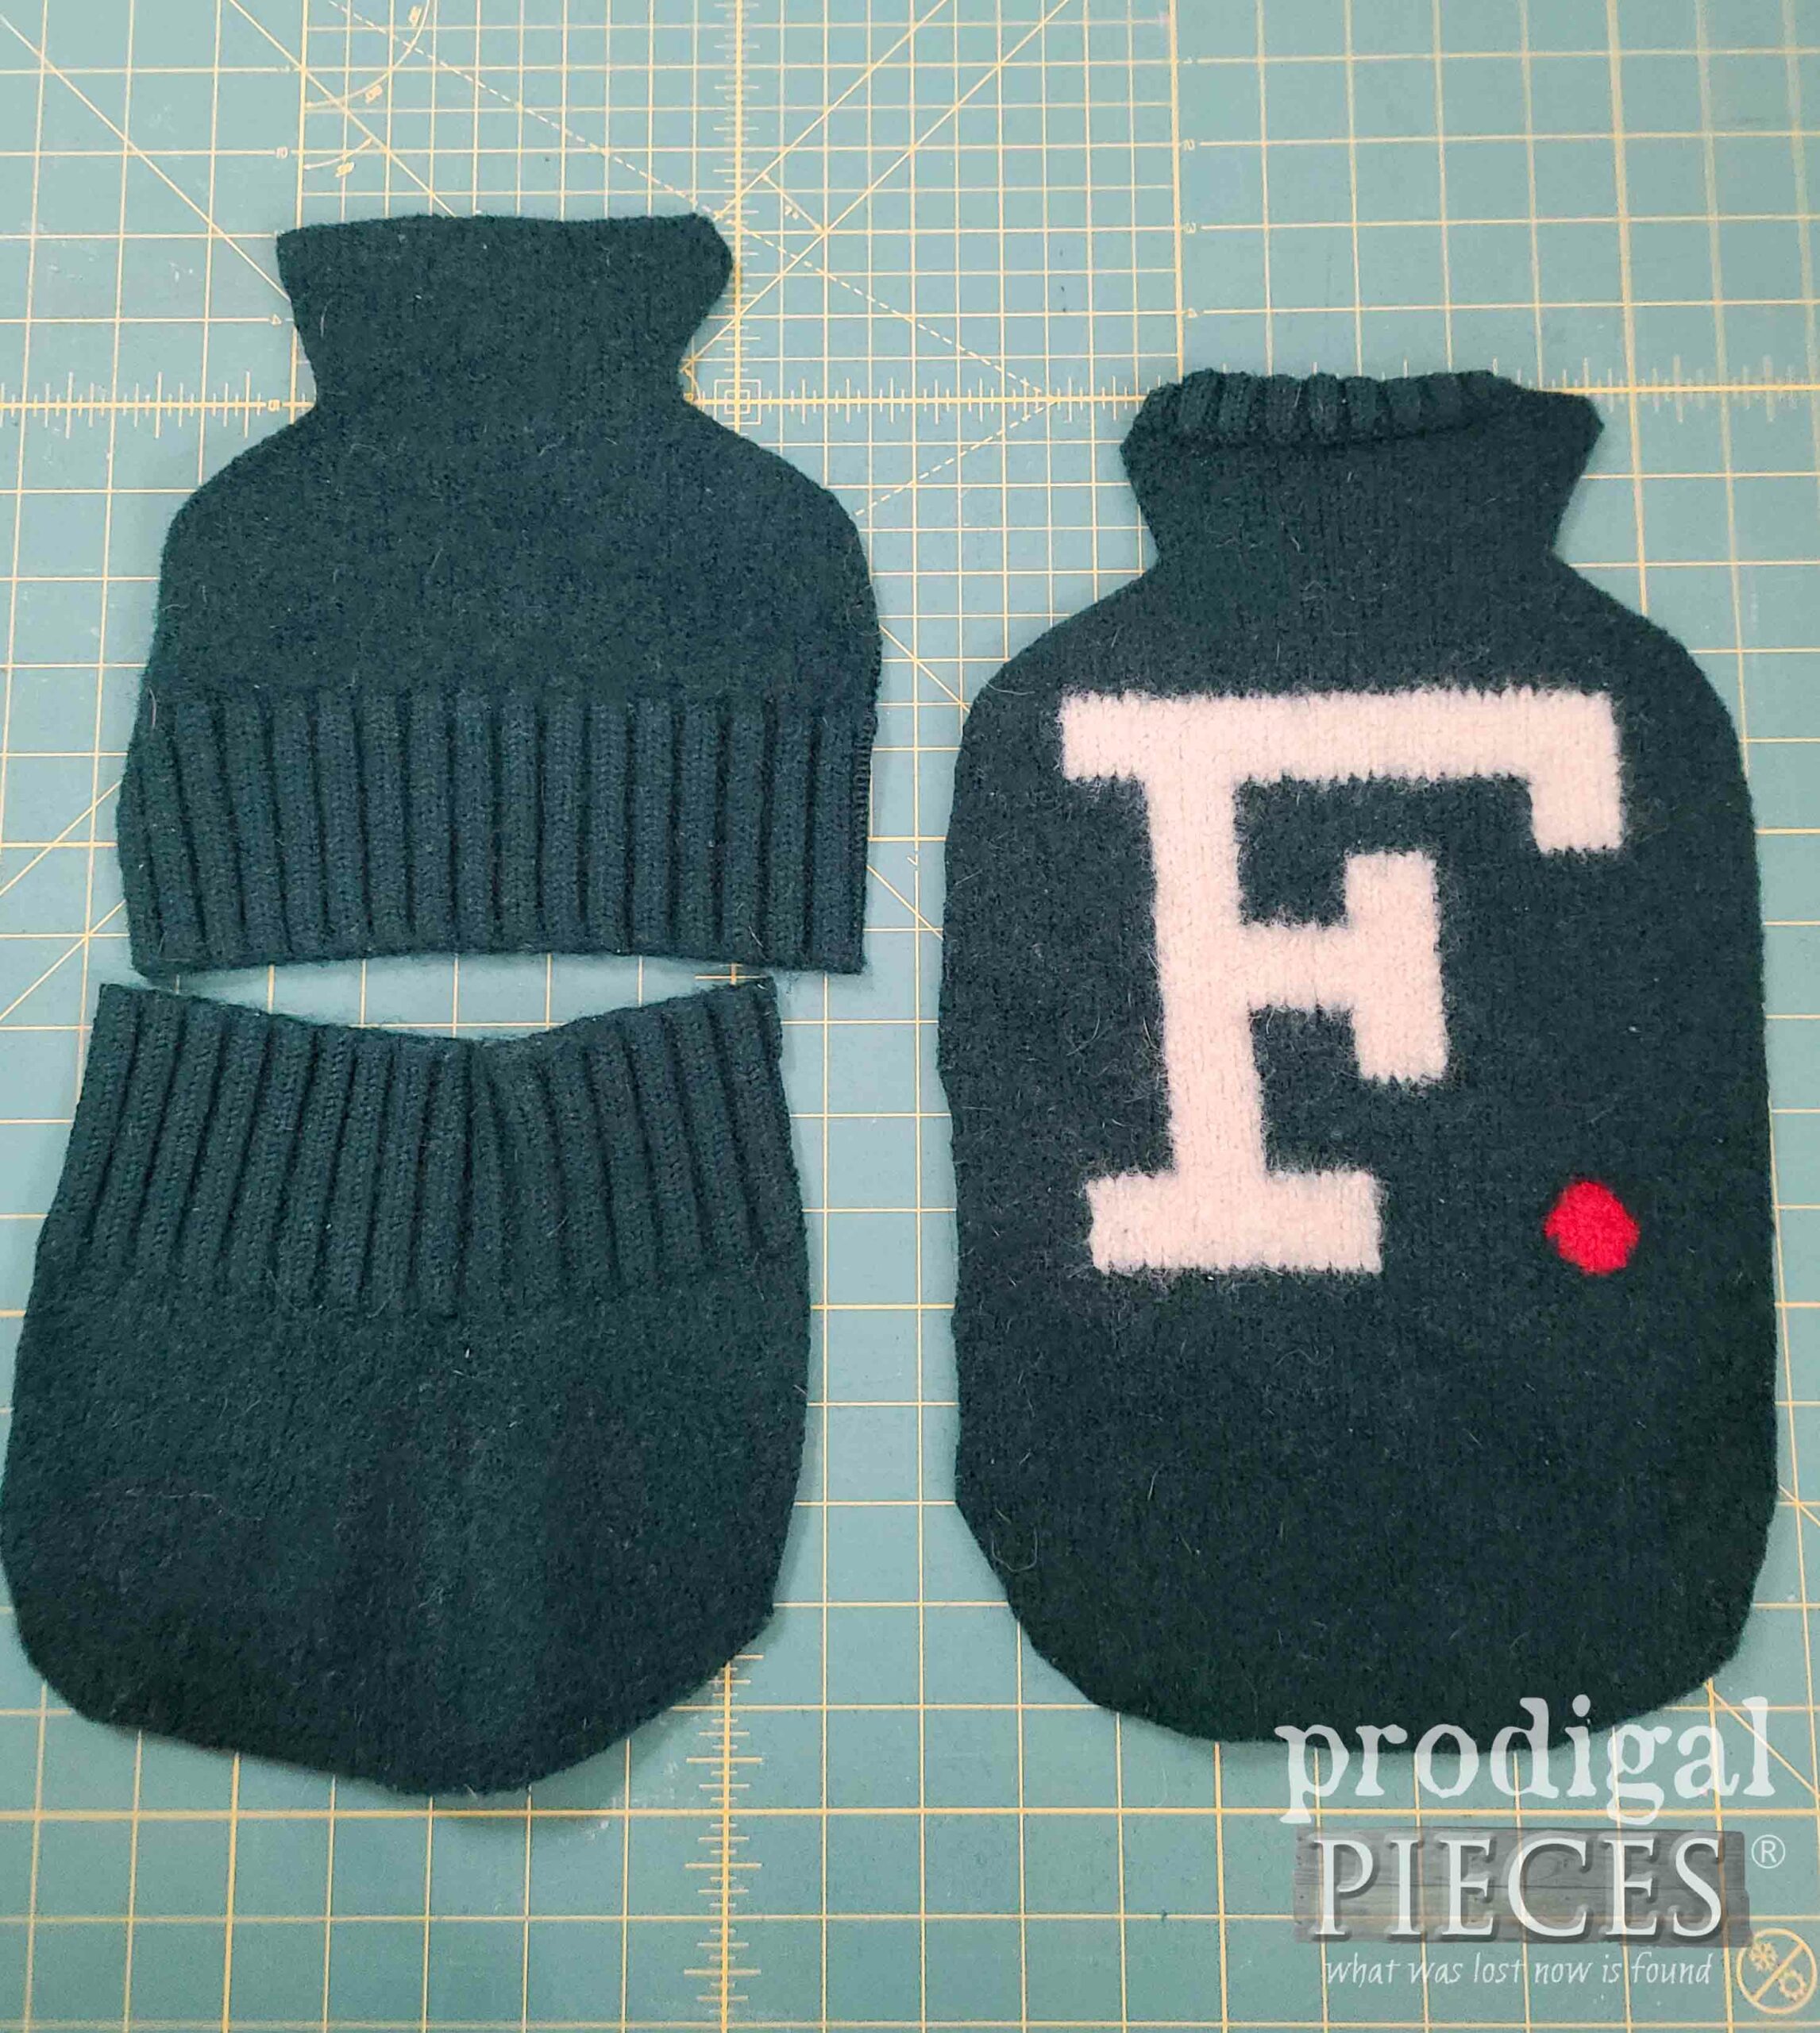 DIY Hot Water Bottle Pieces from Felted Wool Sweater | prodigalpieces.com #prodigalpieces